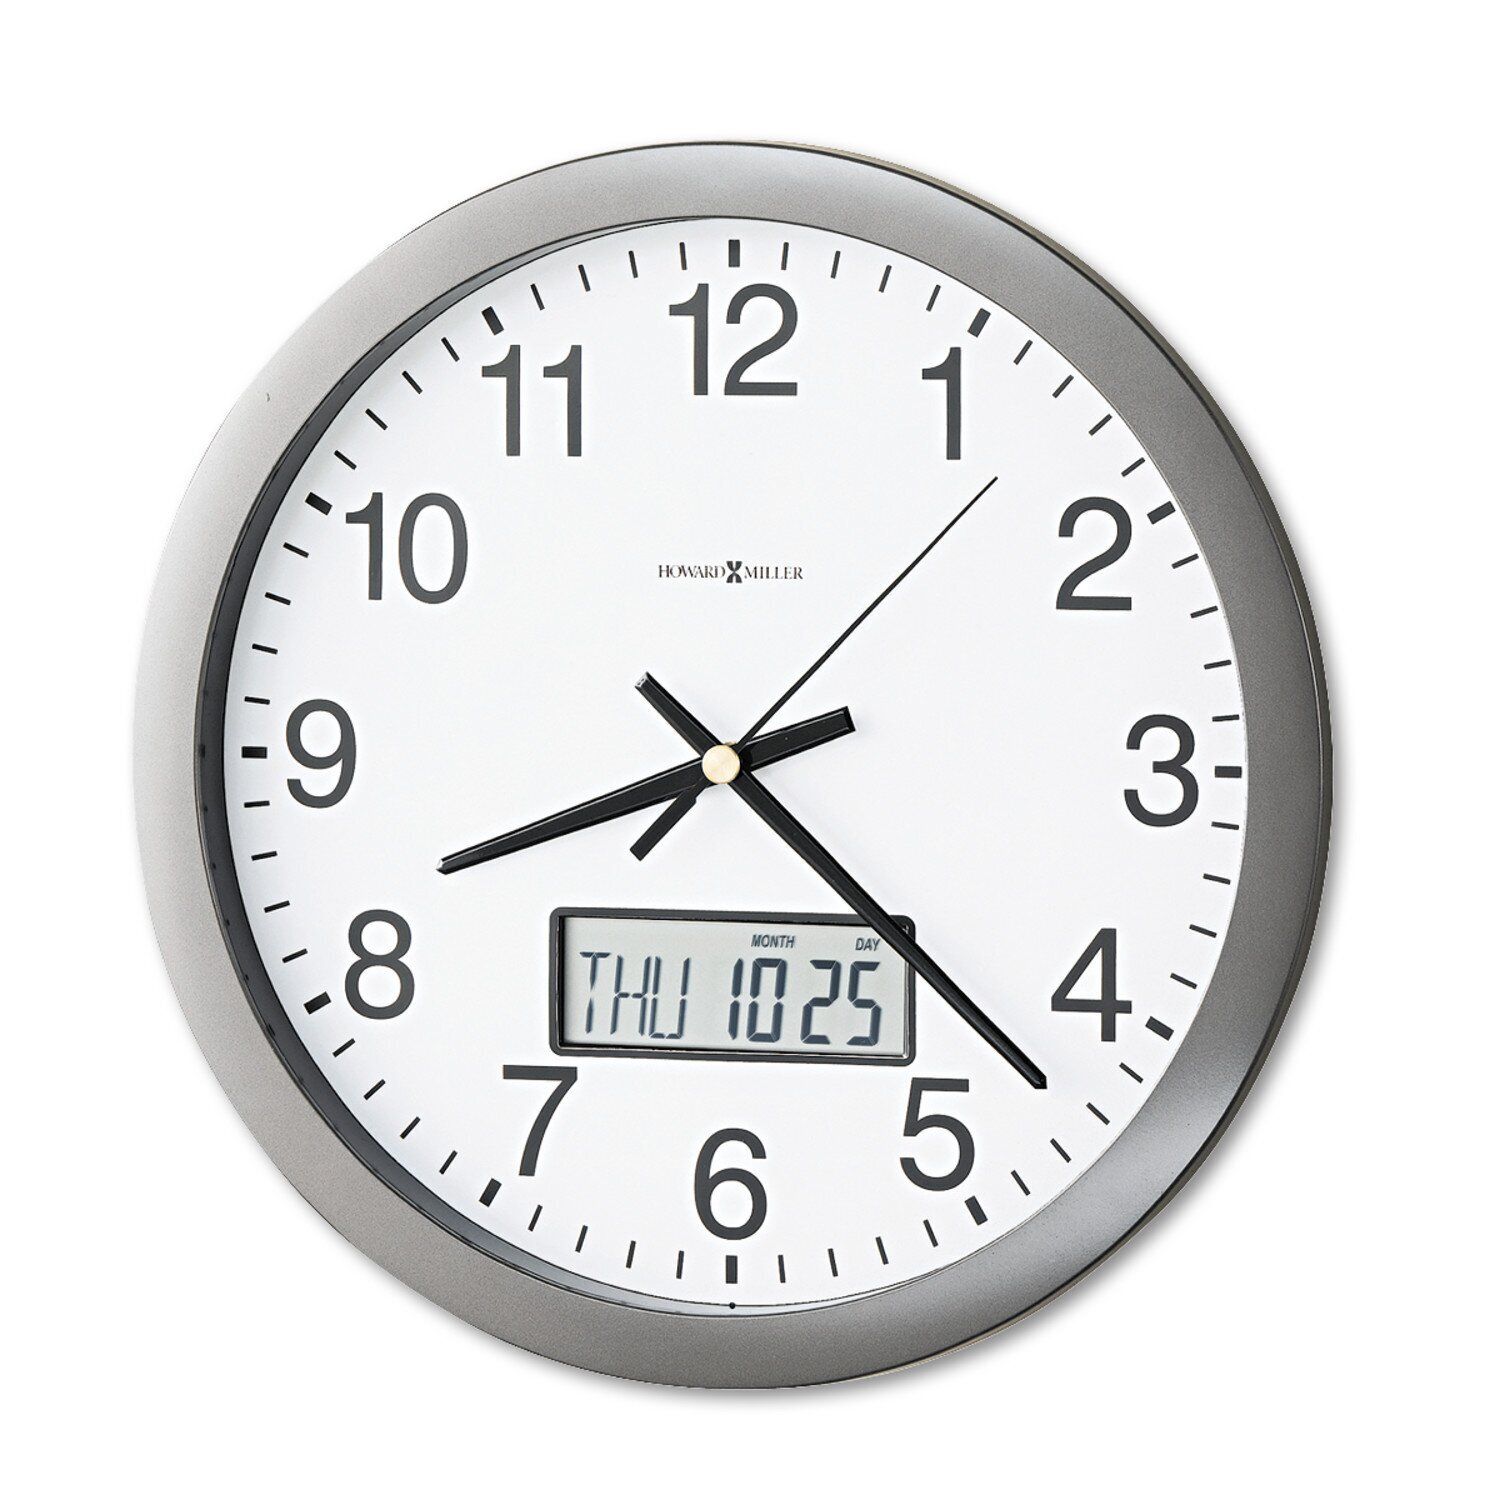 Analog Date Clock with LCD Inlay